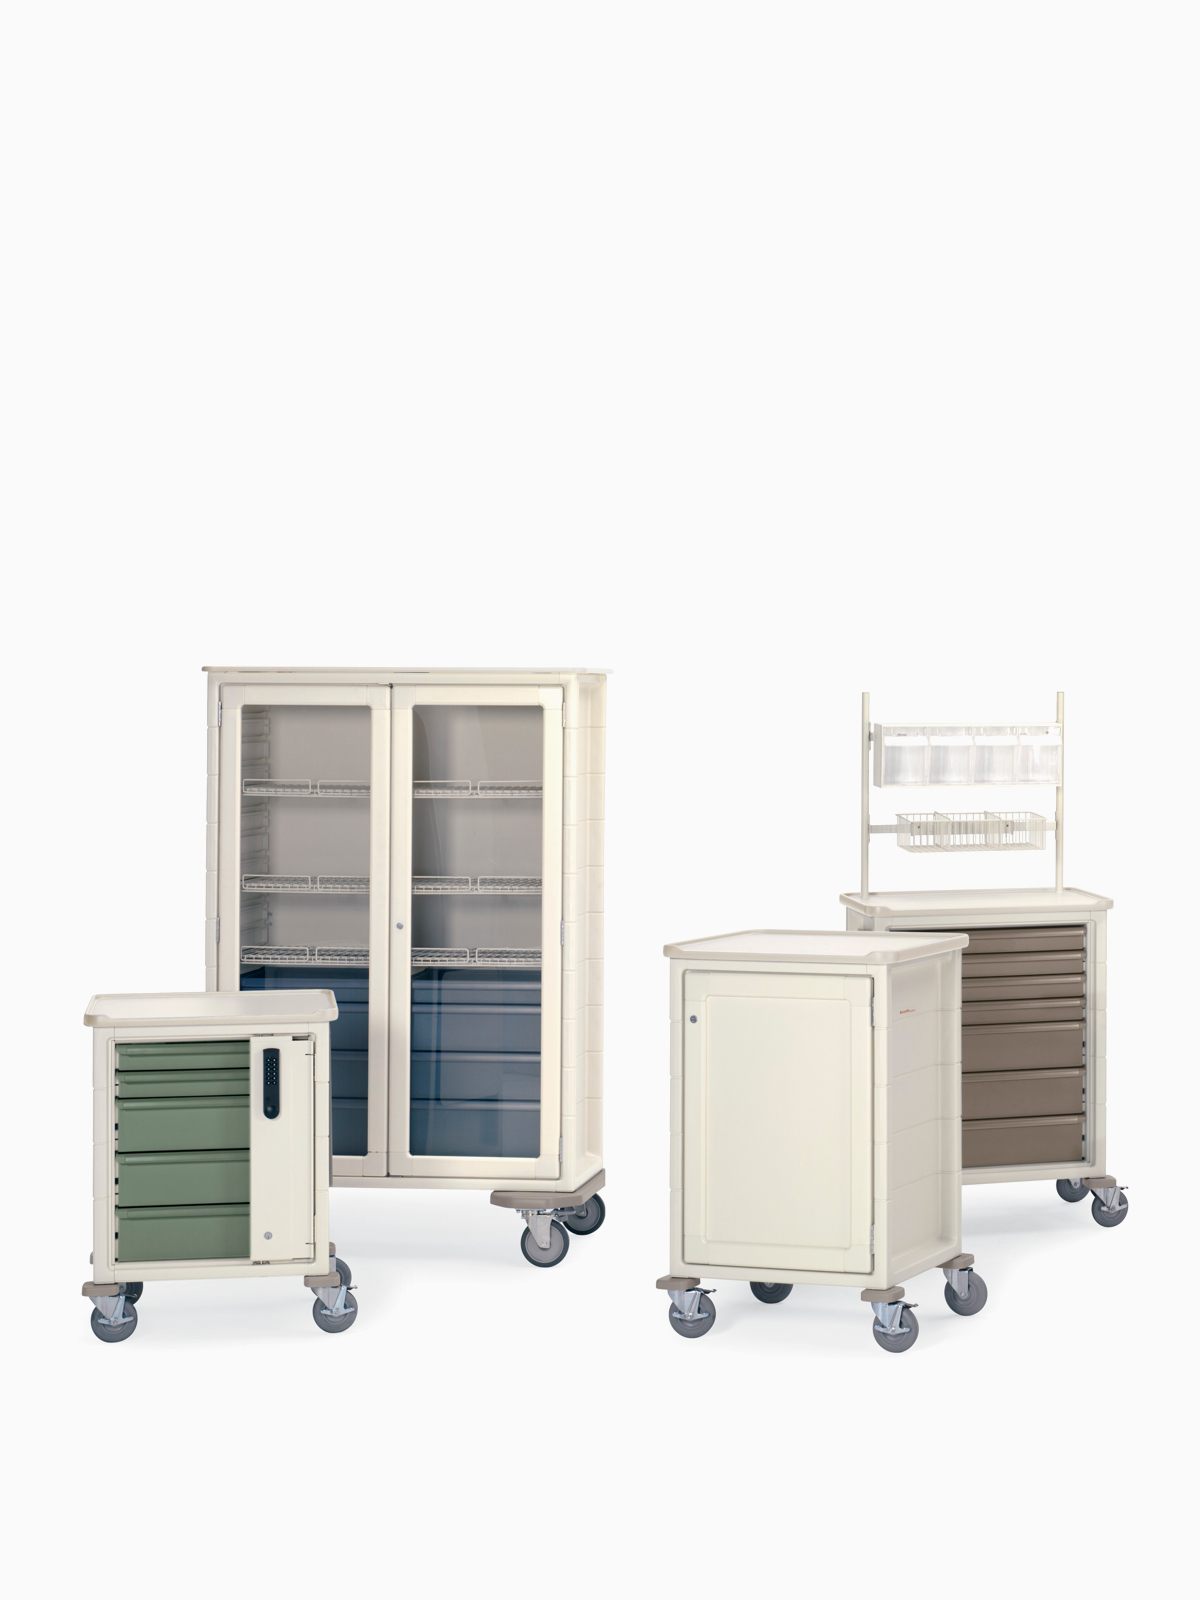 Procedure and Supply Carts